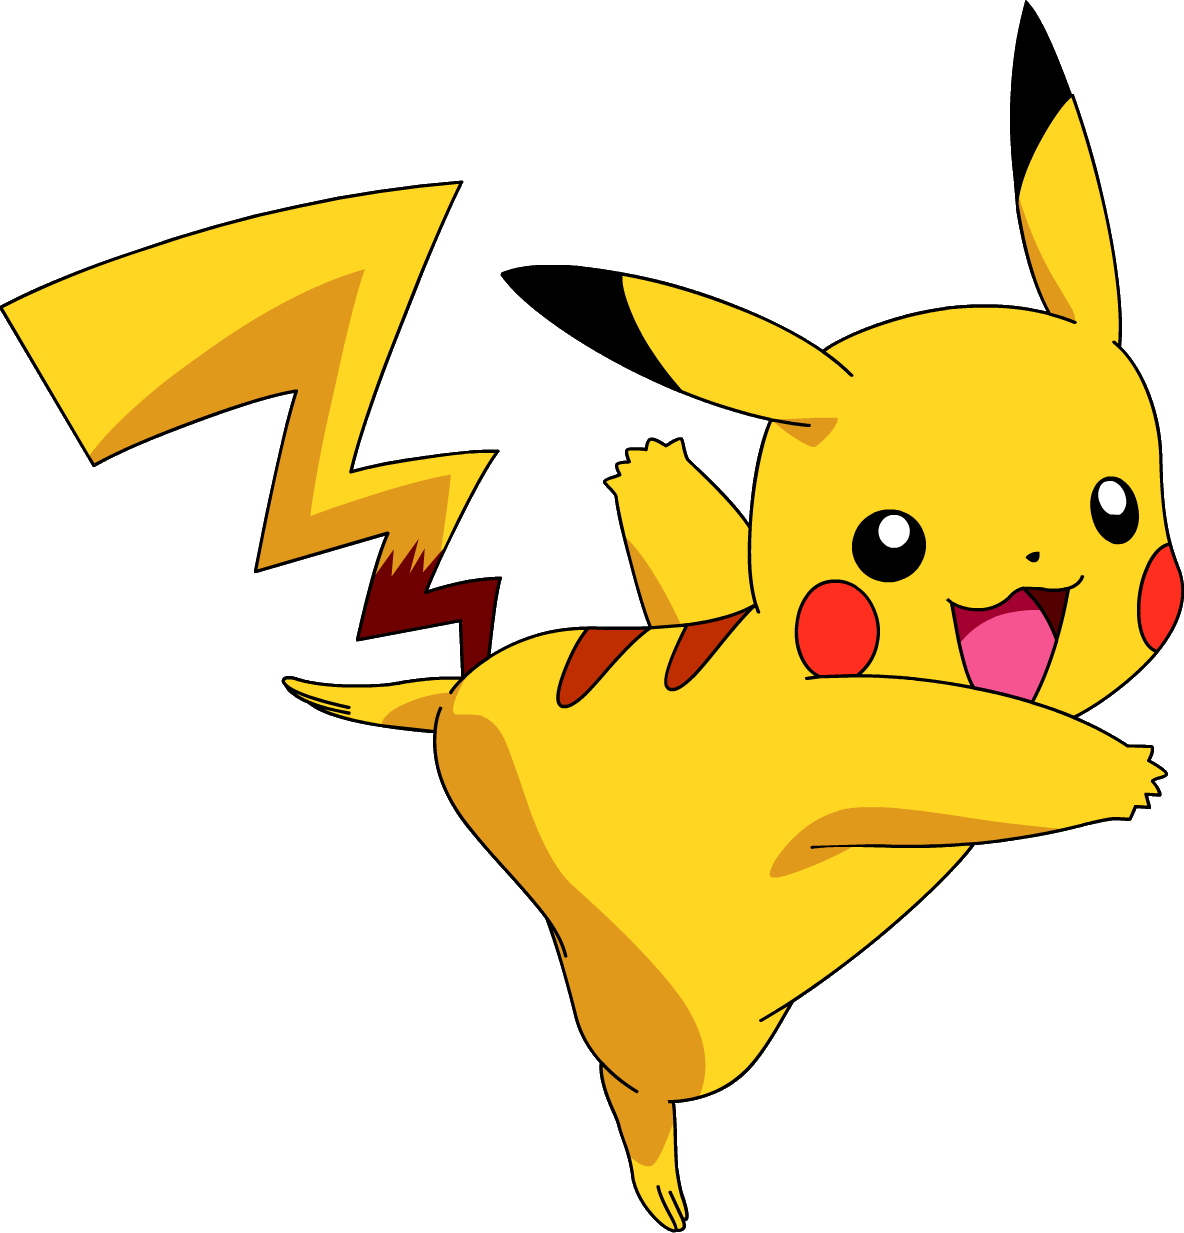 Pikachu Clipart Roblox Pikachu Roblox Transparent Free For Download On Webstockreview 2020 - videojuego roblox pikachu kavaii pikachu png clipart pngocean